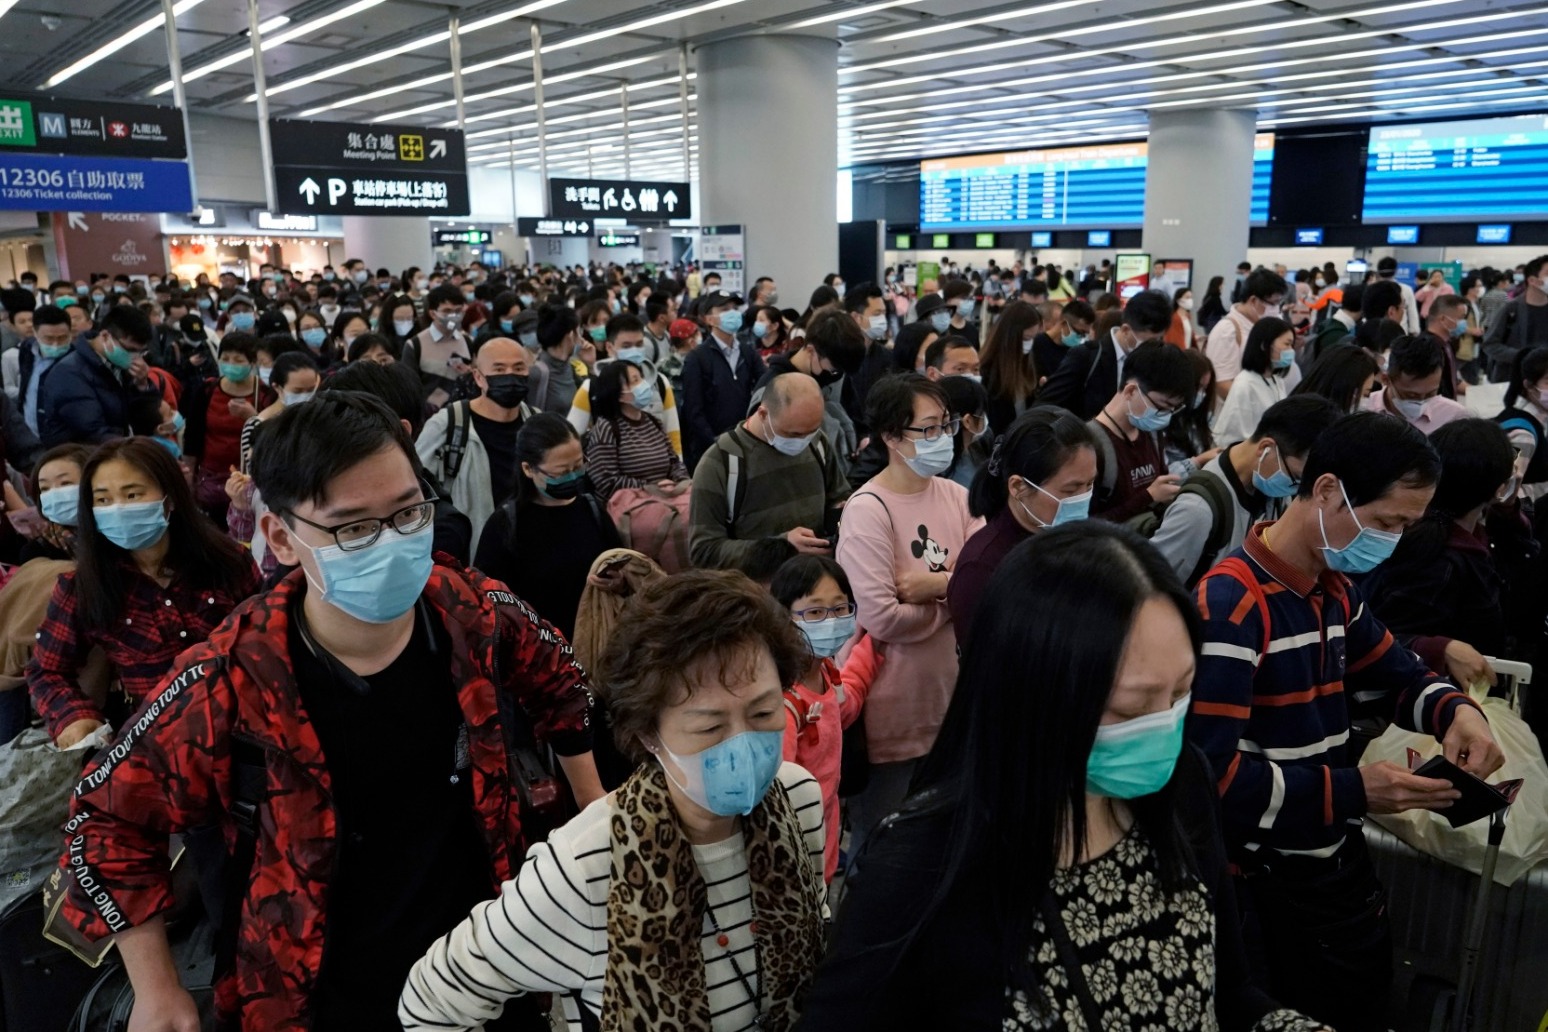 China has extended protective measures to contain the coronavirus outbreak 